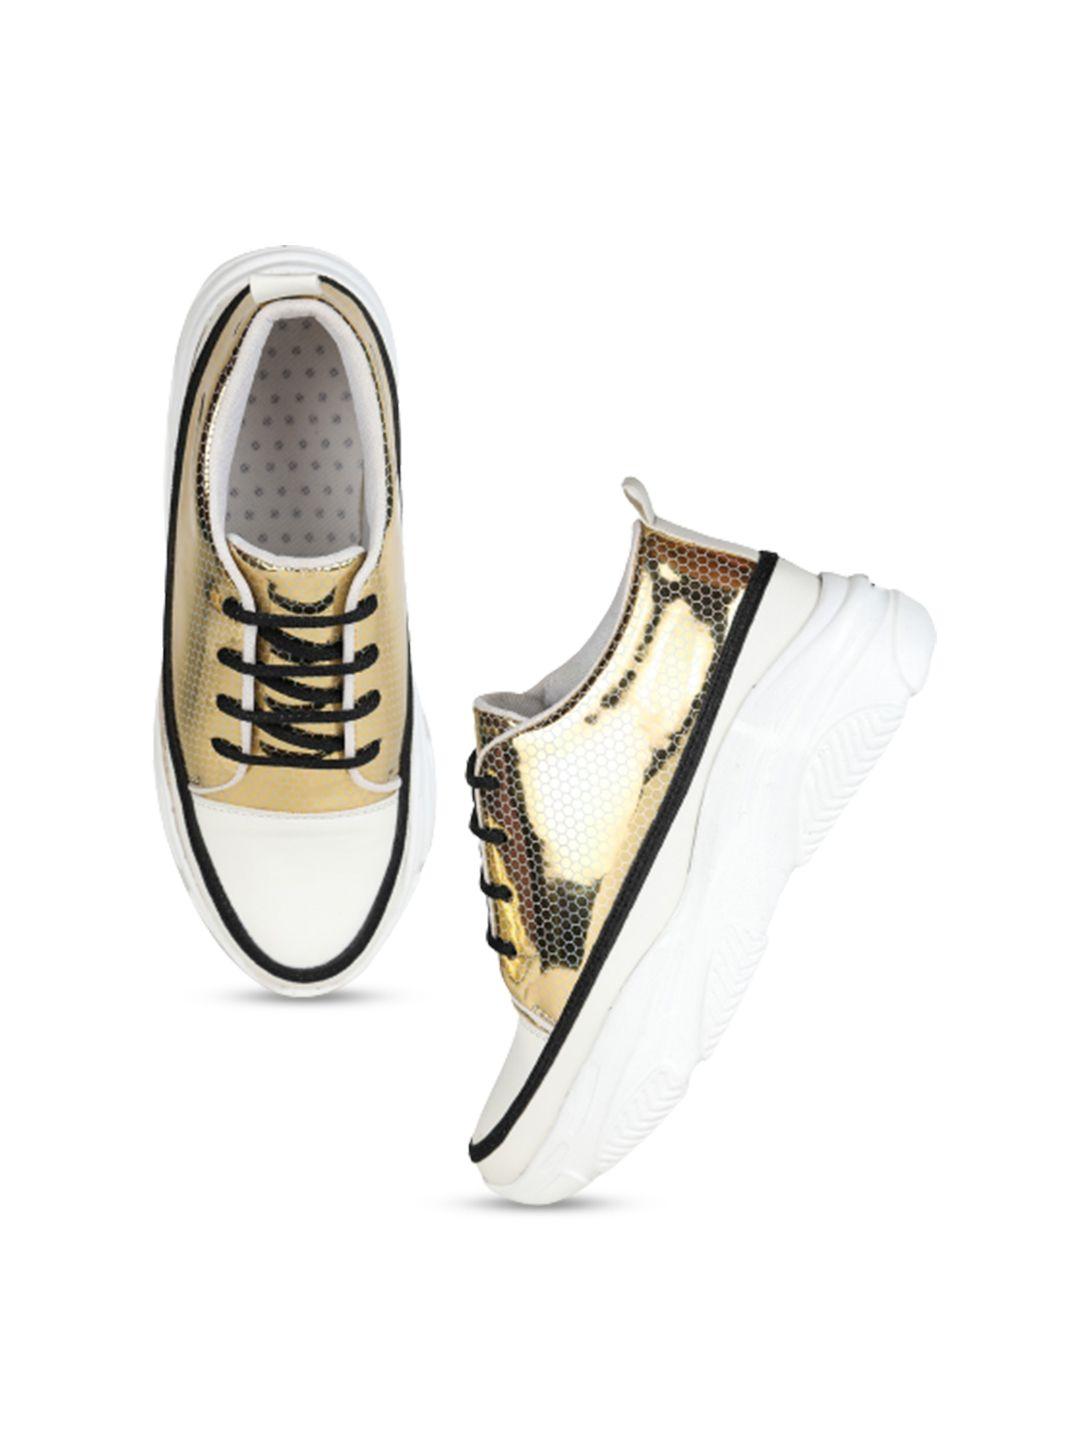 shezone women gold-toned textured sneakers